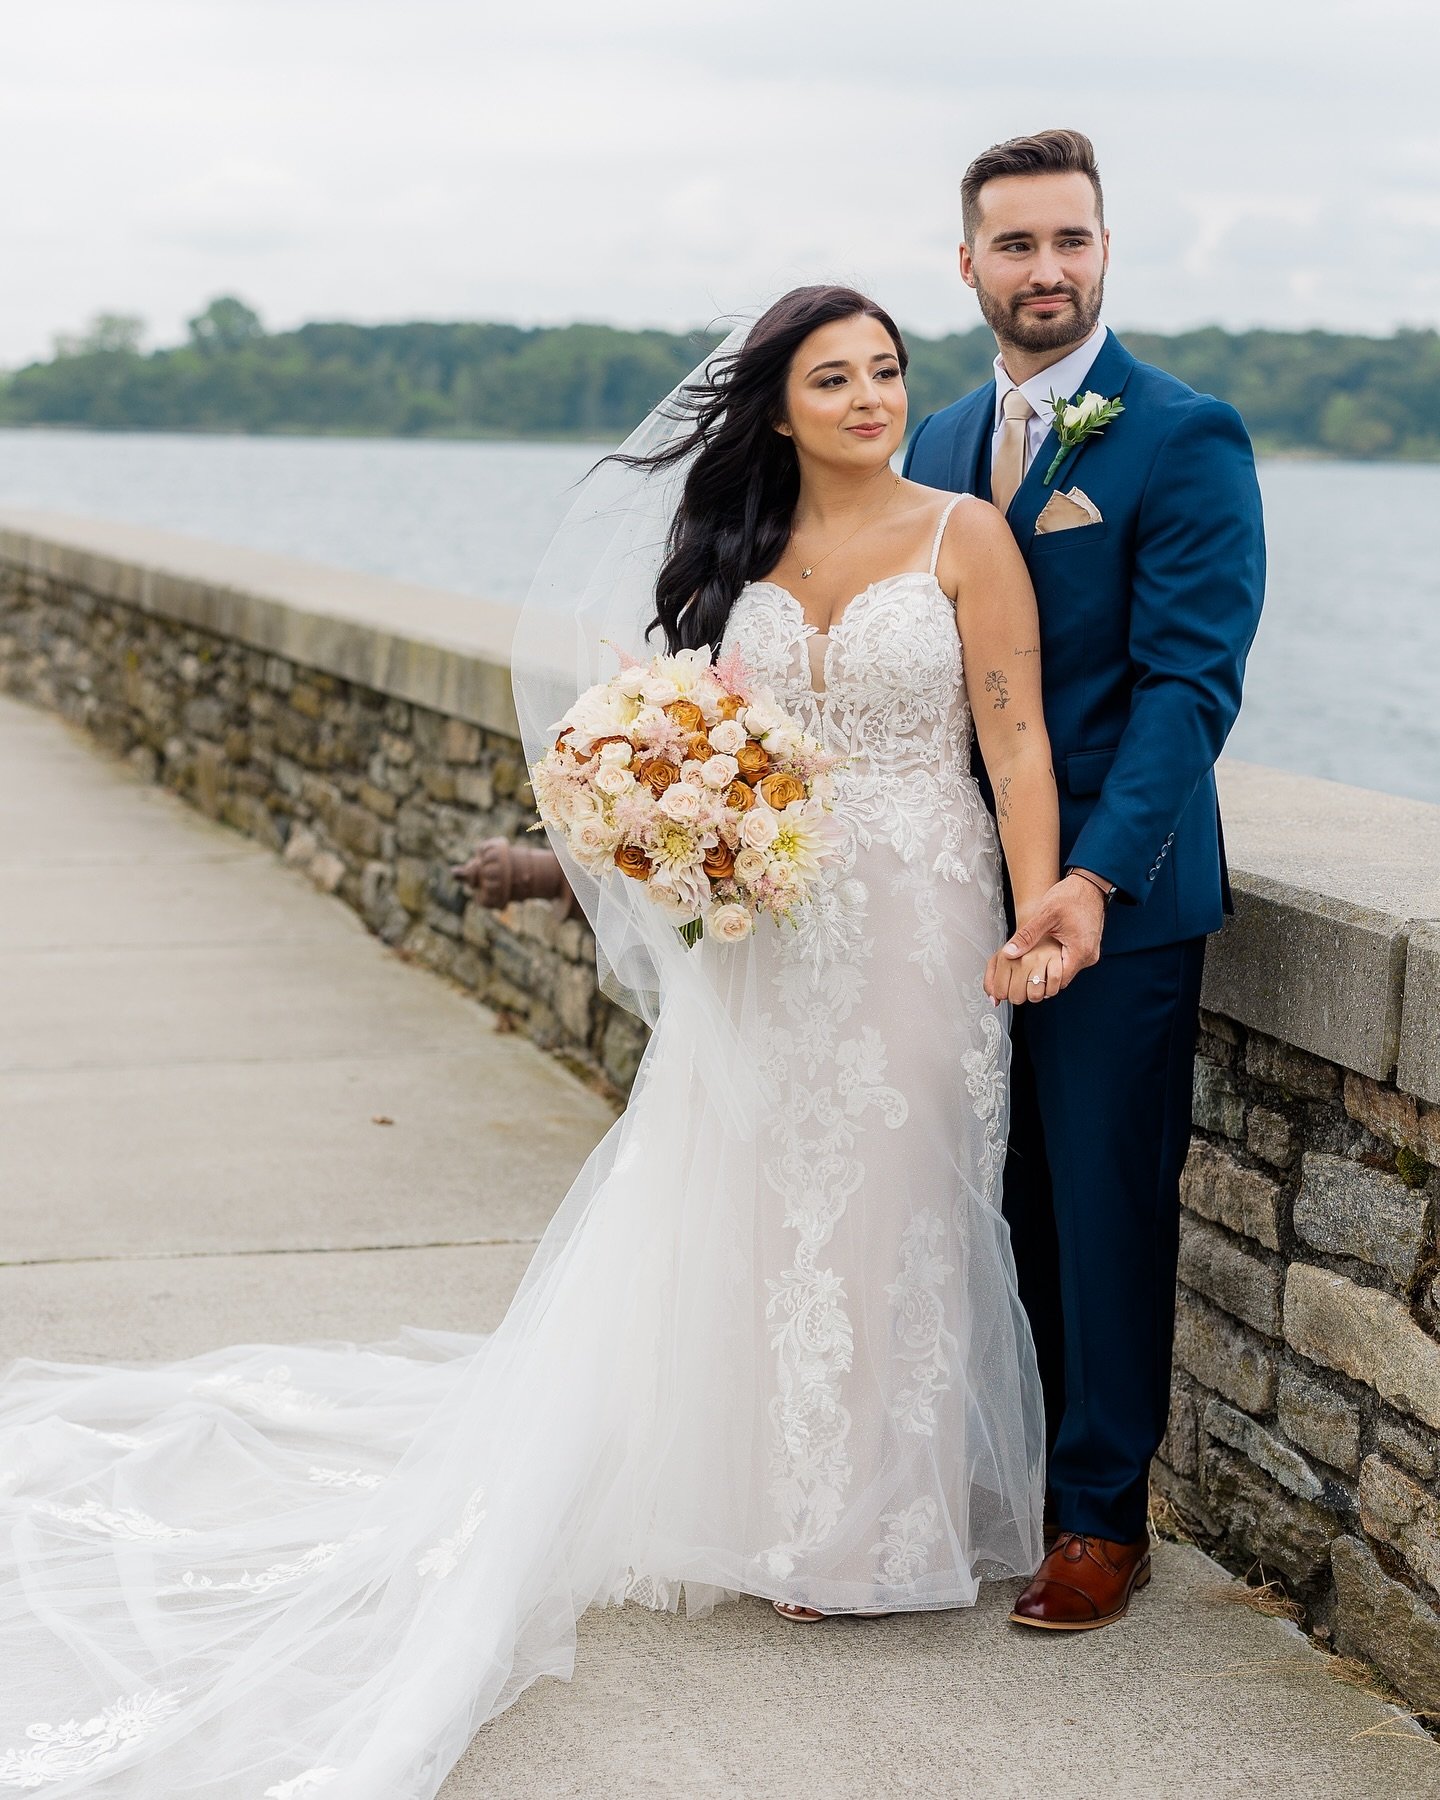 I&rsquo;ve got sunshine, on a cloudy day&hellip;pro-tip: don&rsquo;t be upset if it&rsquo;s not sunny on your wedding day. Cloudy days are some of the best to photograph in! 

Westchester weddings | Connecticut wedding | New York wedding photographer